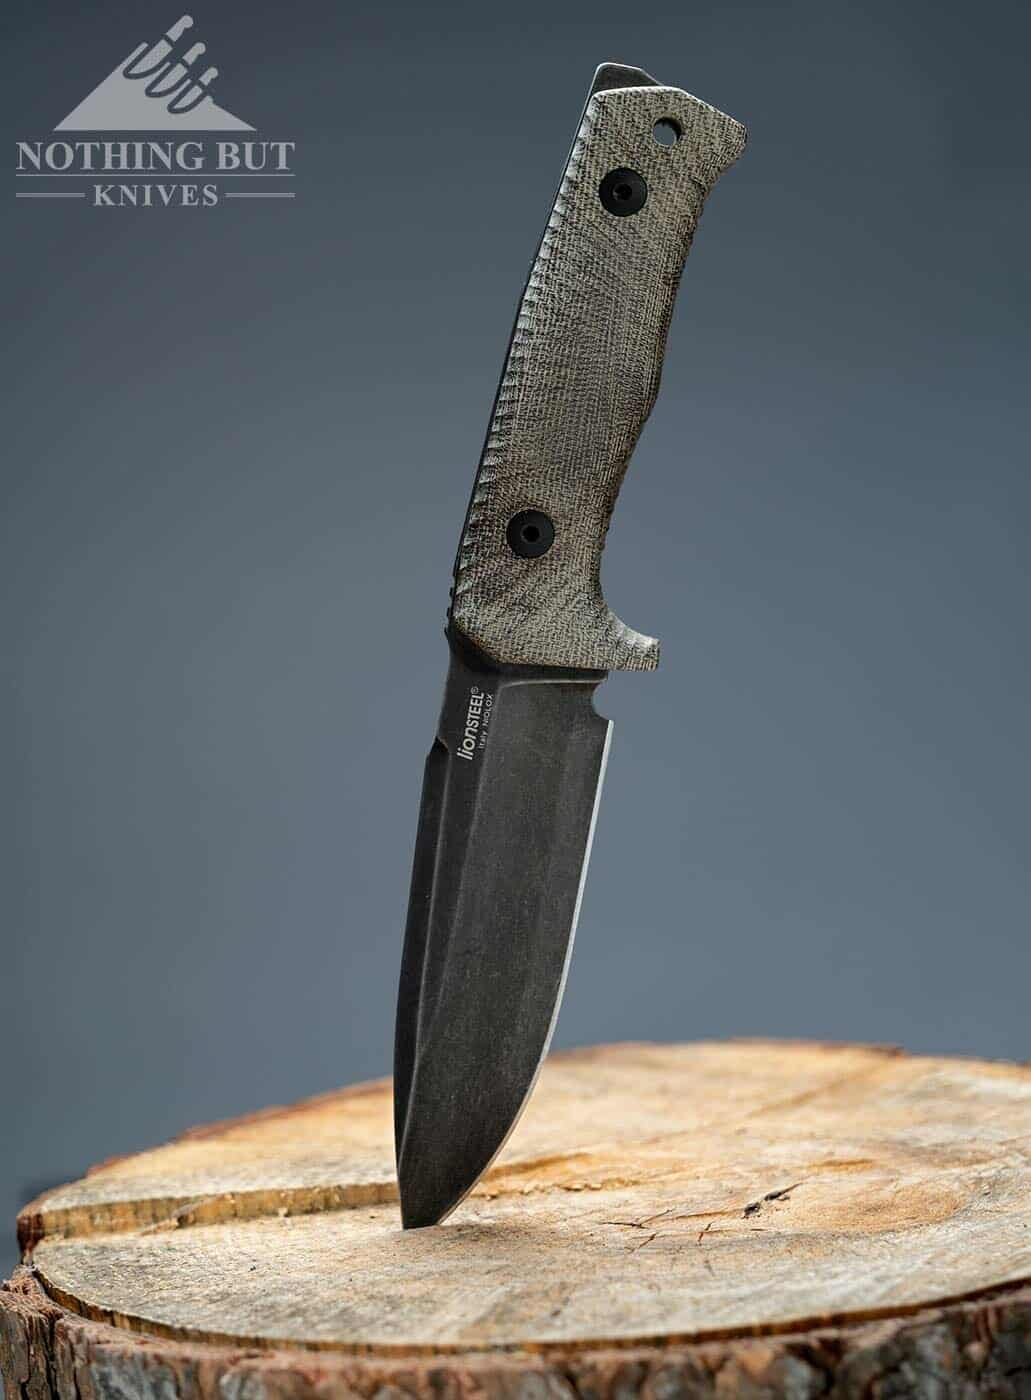 The LionSteel T5 tactical knife sticking out of a stump.